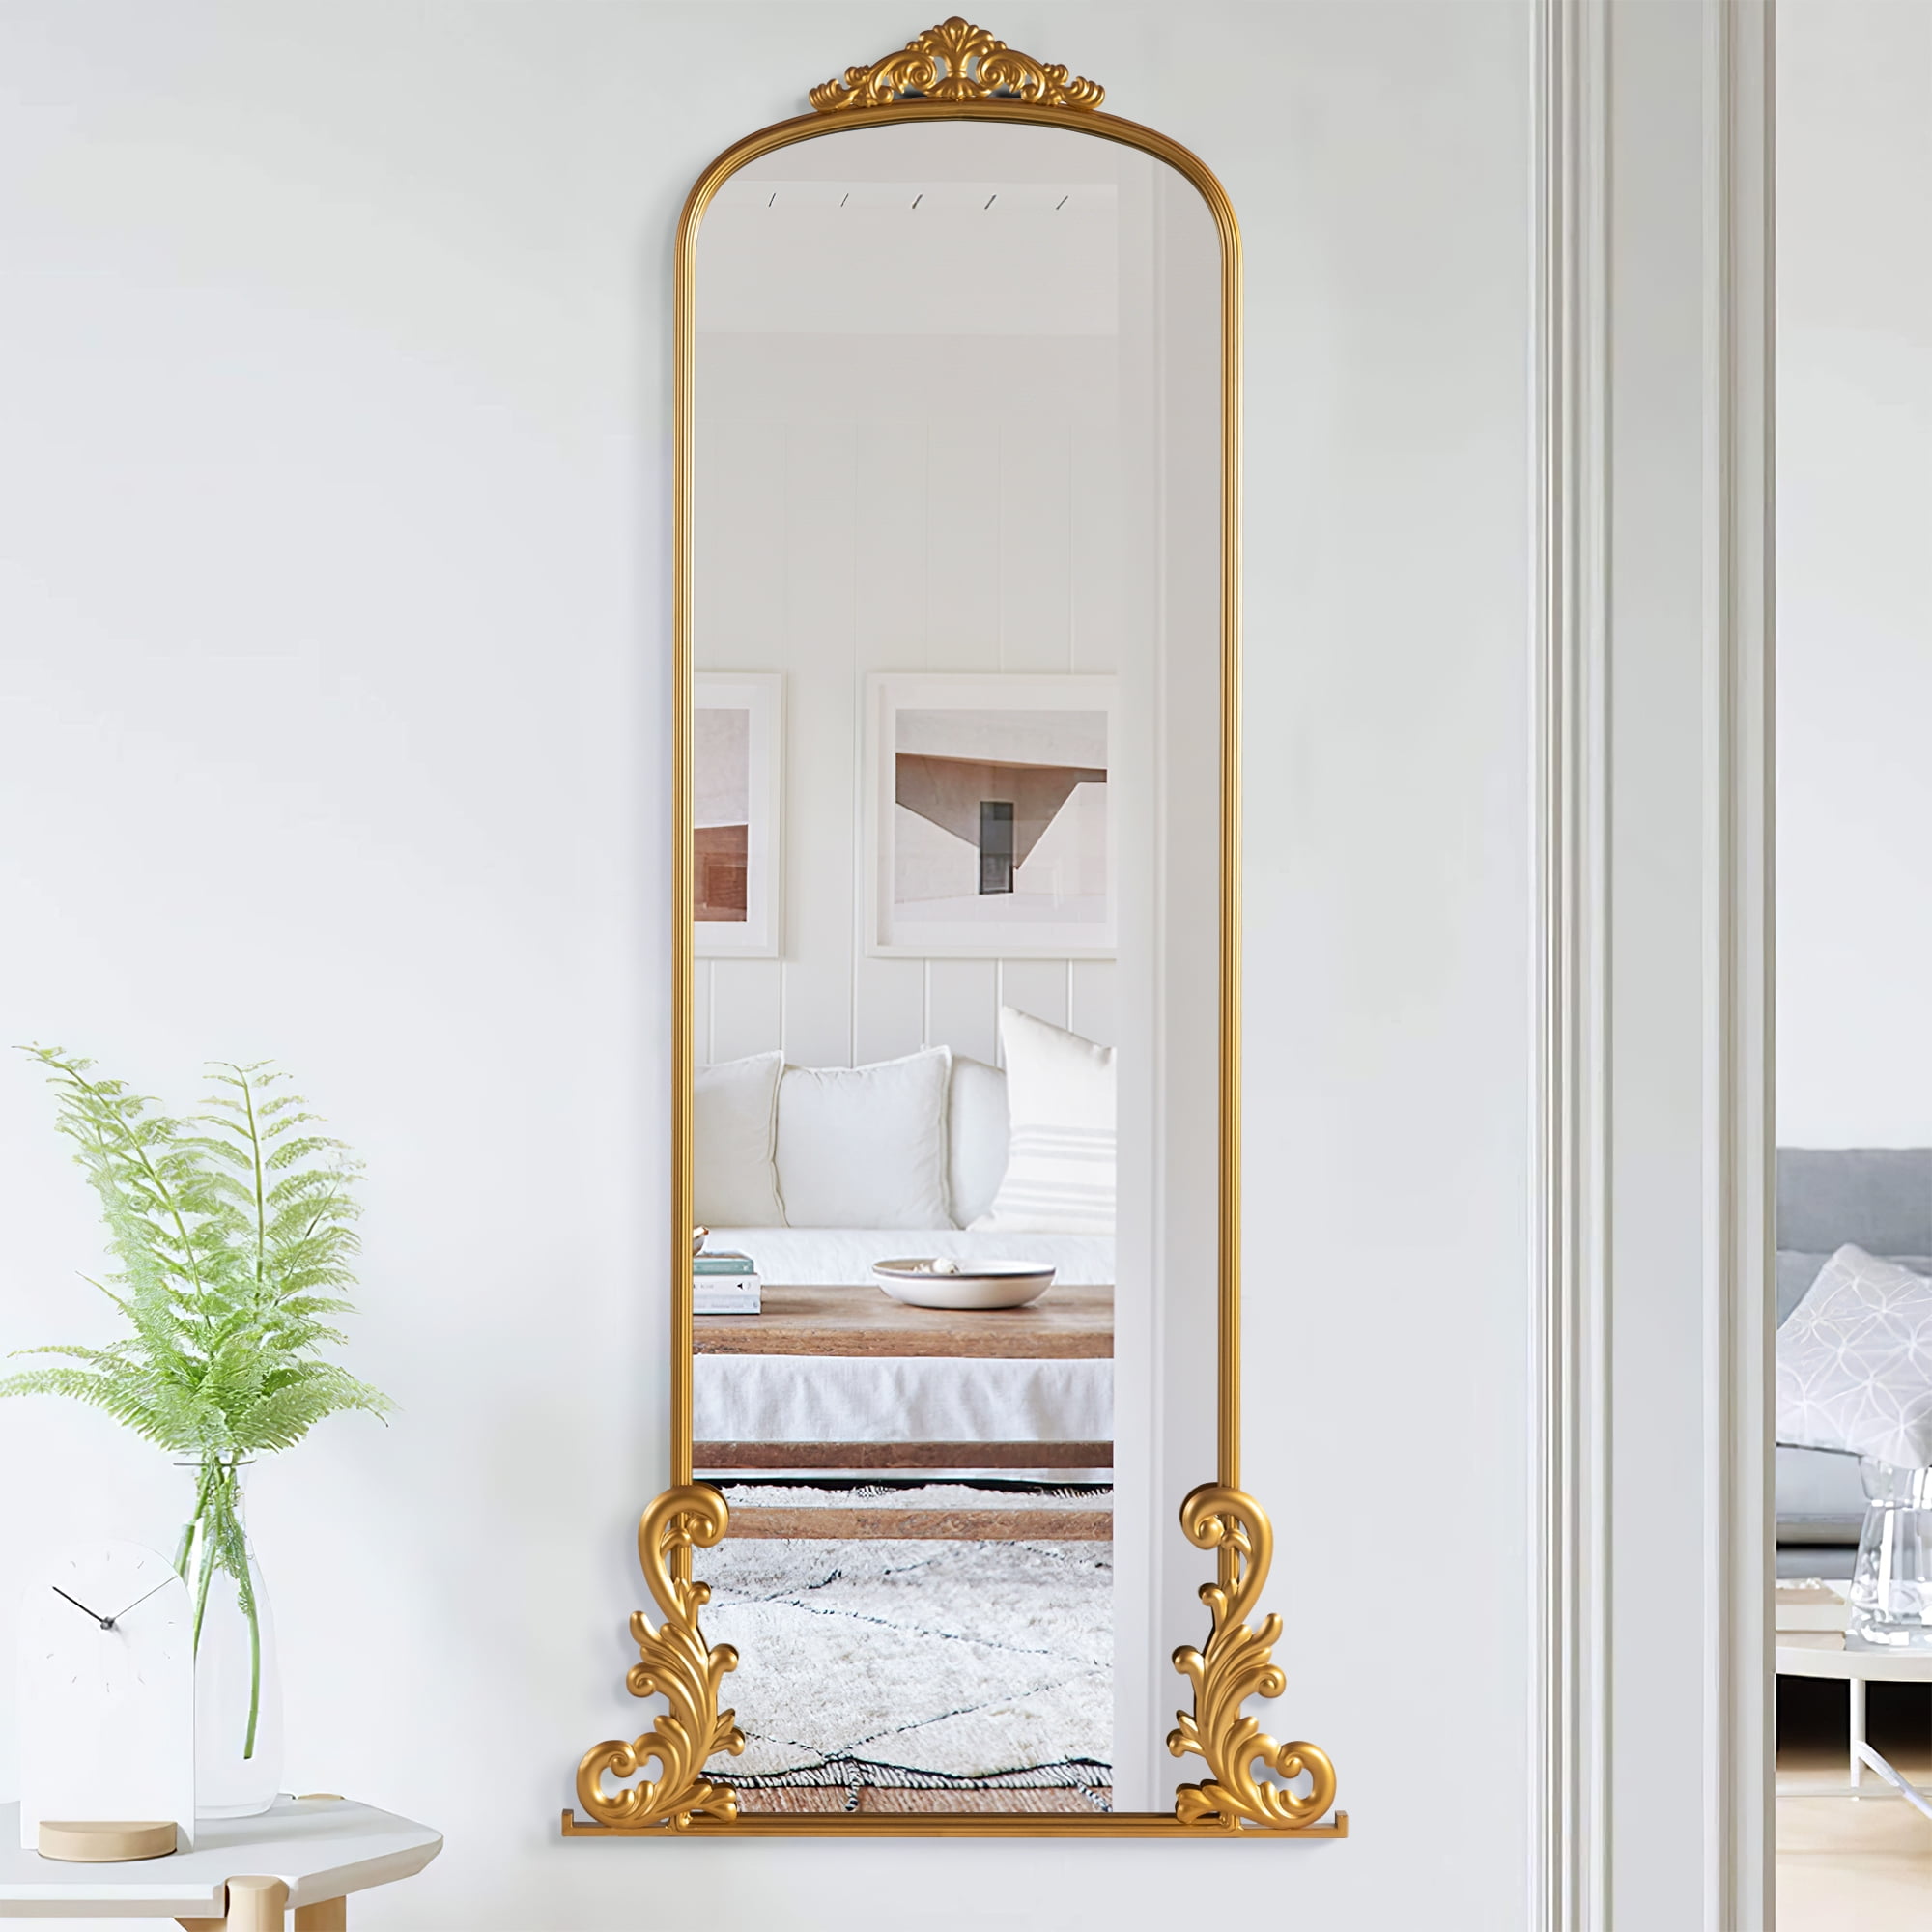 NeuType Large Arch Mirror Full Length Vintage Fireplace Mirror  68*29,Gold,Iron